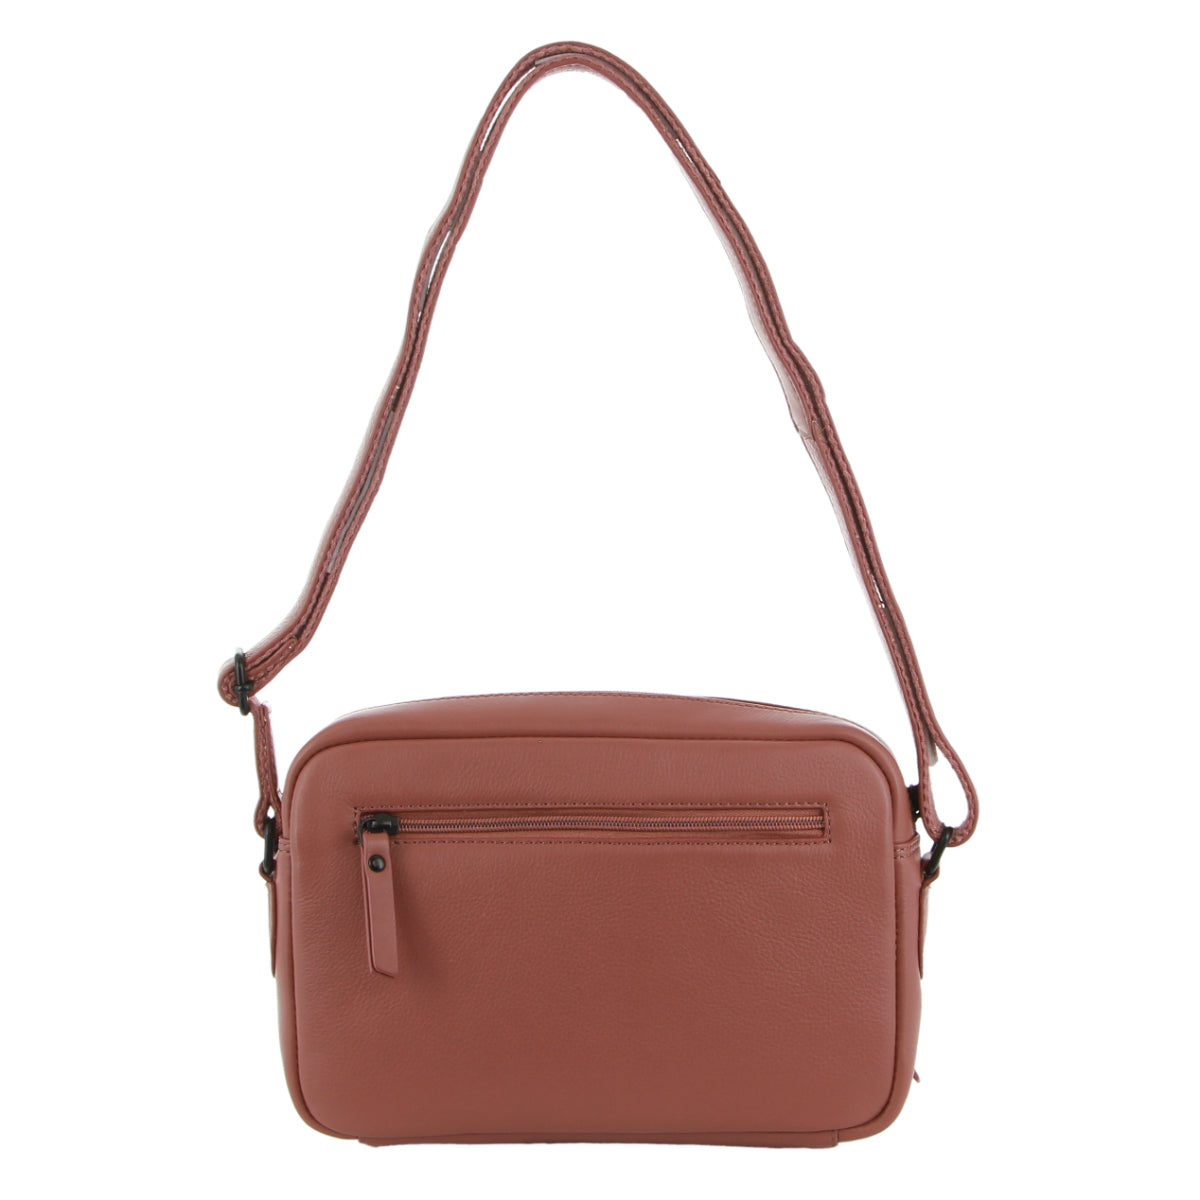 Milleni - NL3871 Small leather sidebag - Rose-1